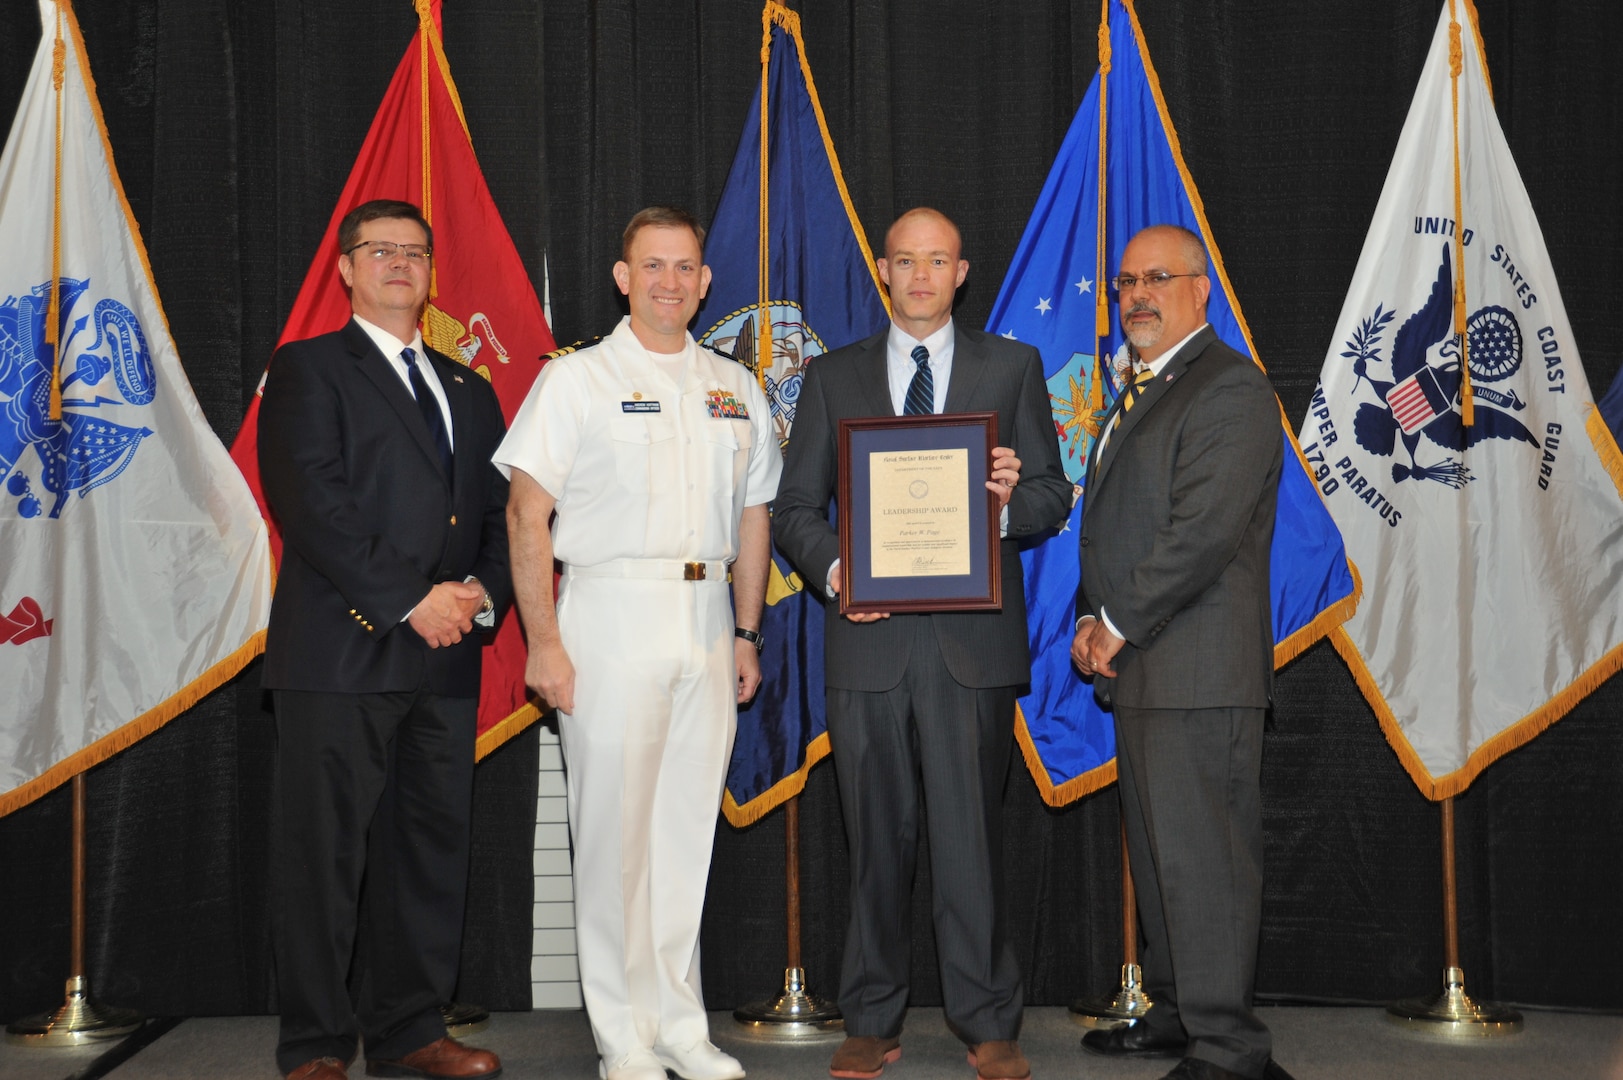 IMAGE: Parker Page is presented the Leadership Award at Naval Surface Warfare Center Dahlgren Division's annual awards ceremony, Apr. 26 at the Fredericksburg Expo and Conference Center.